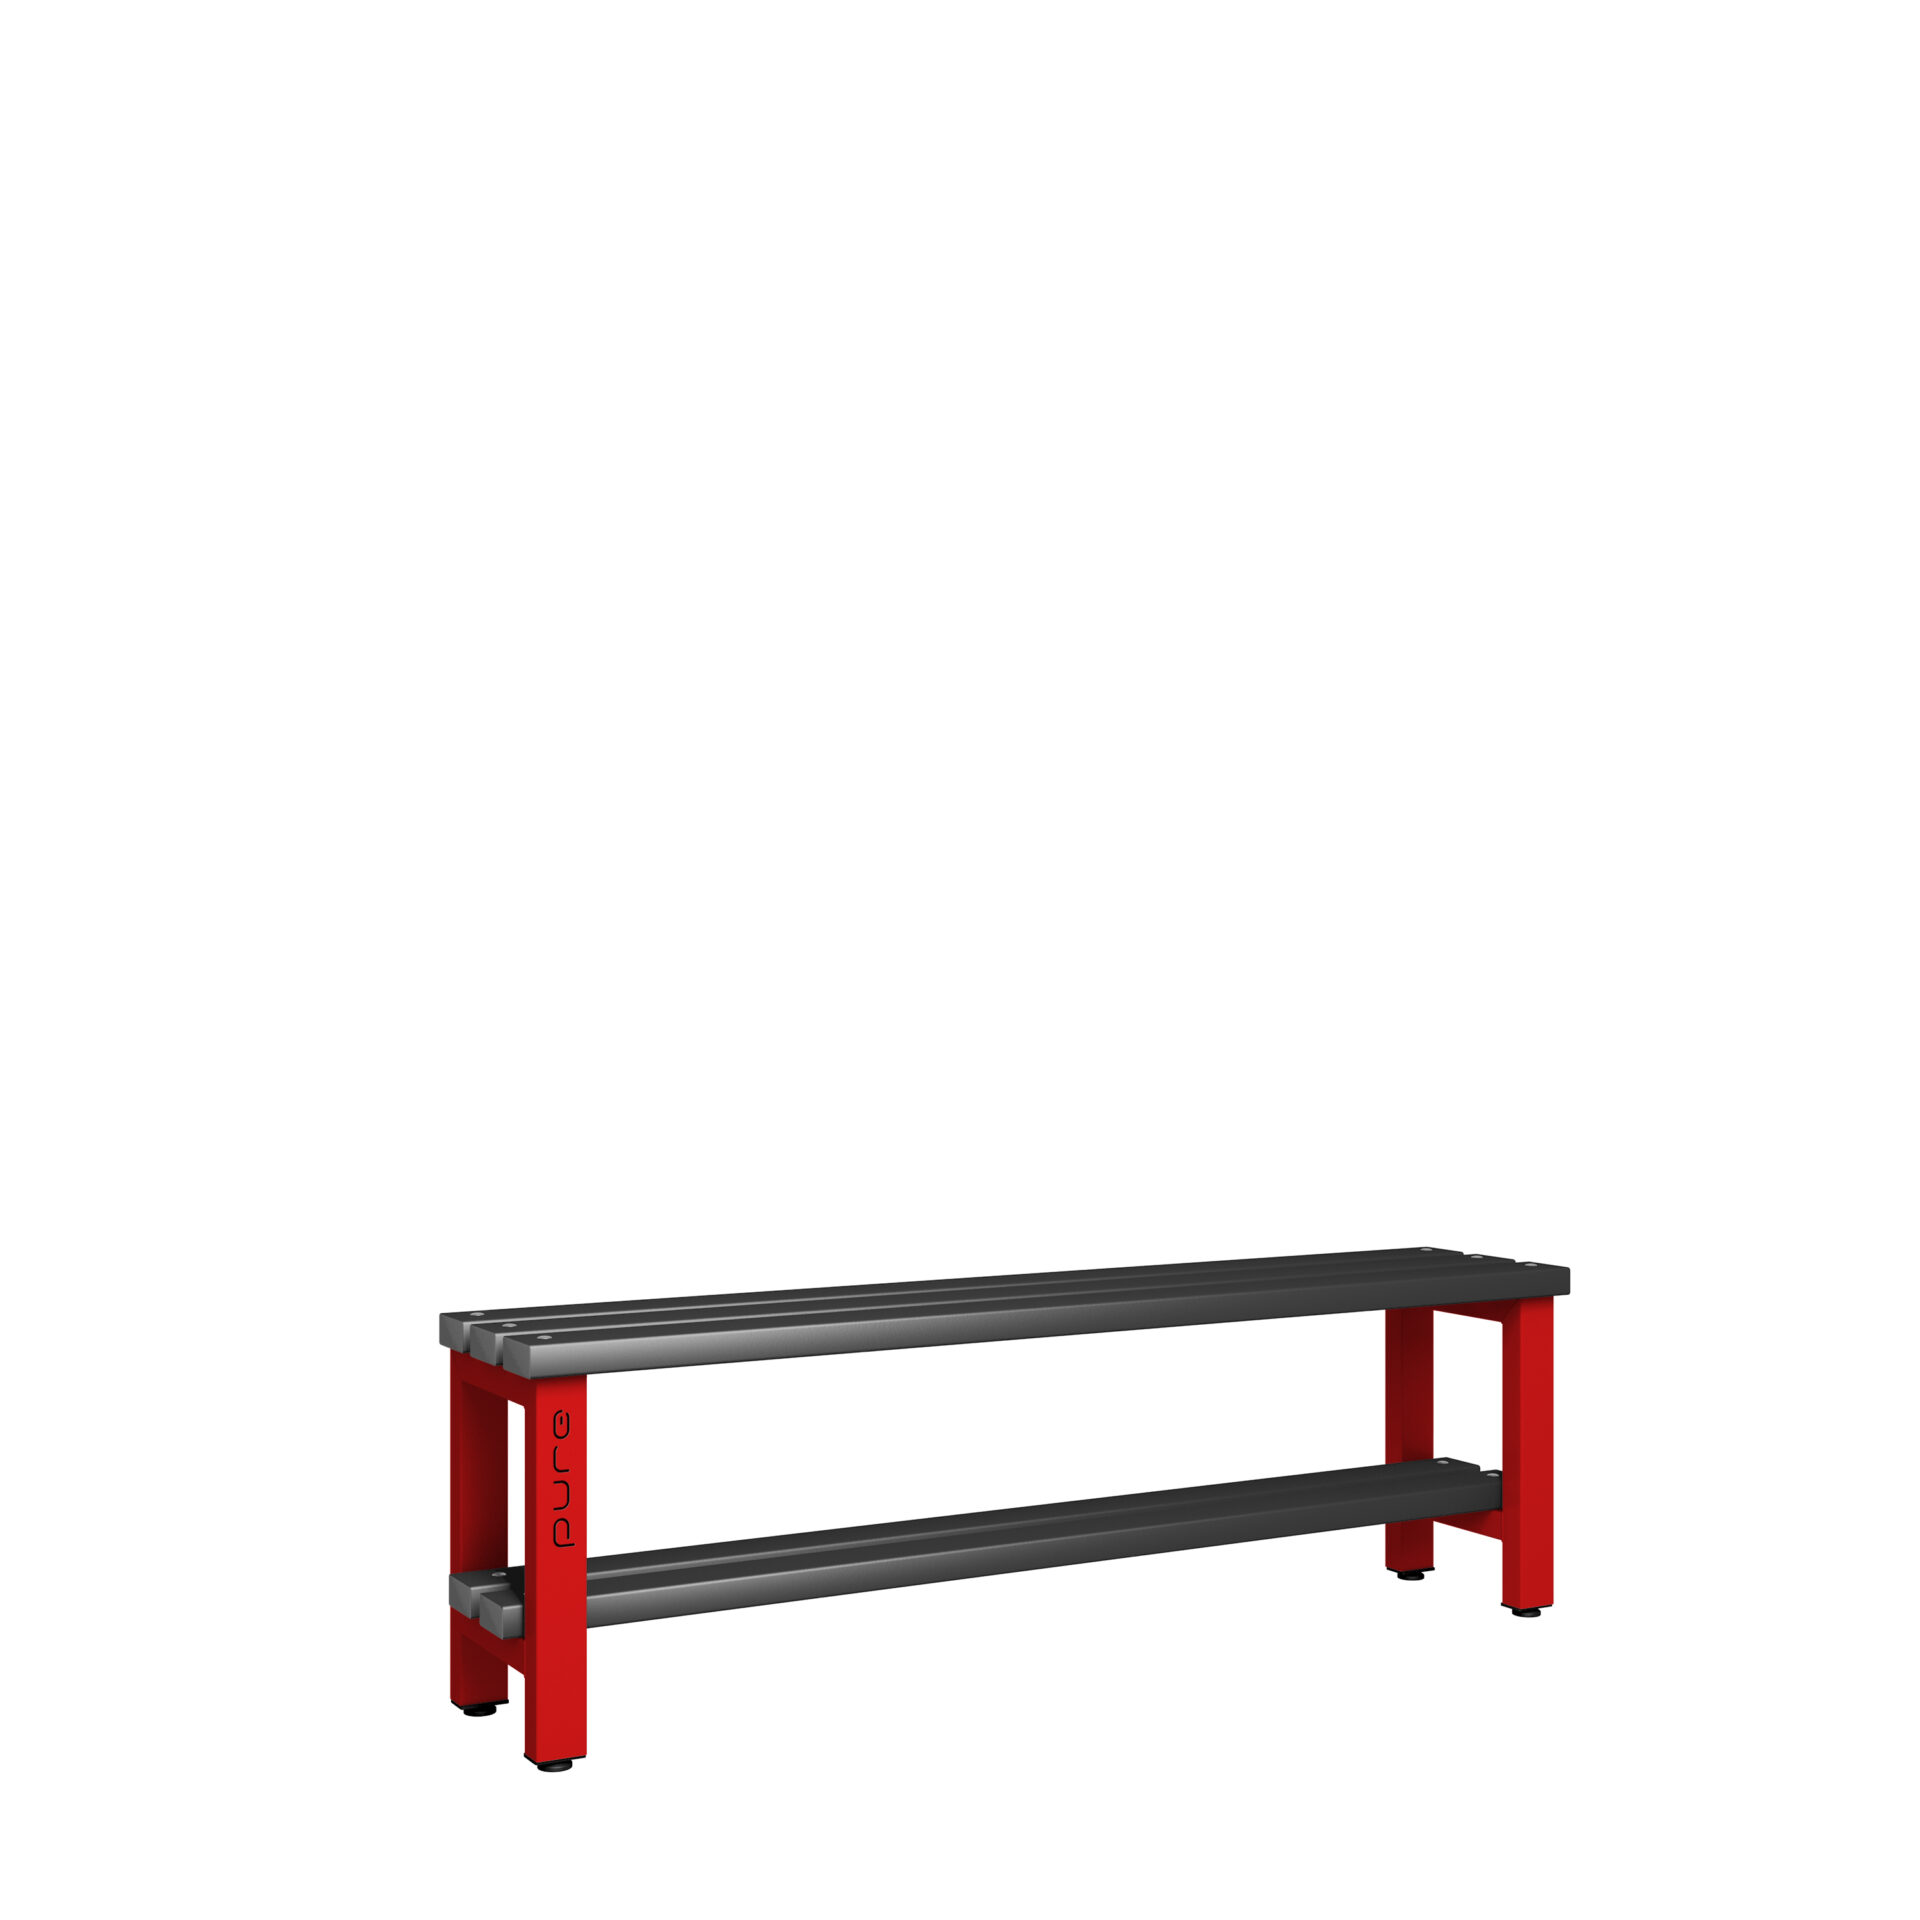 Pure Carbon Zero Single Sided 1500mm Standard Bench With Shoe Shelf - Flame Red / Black Polymer